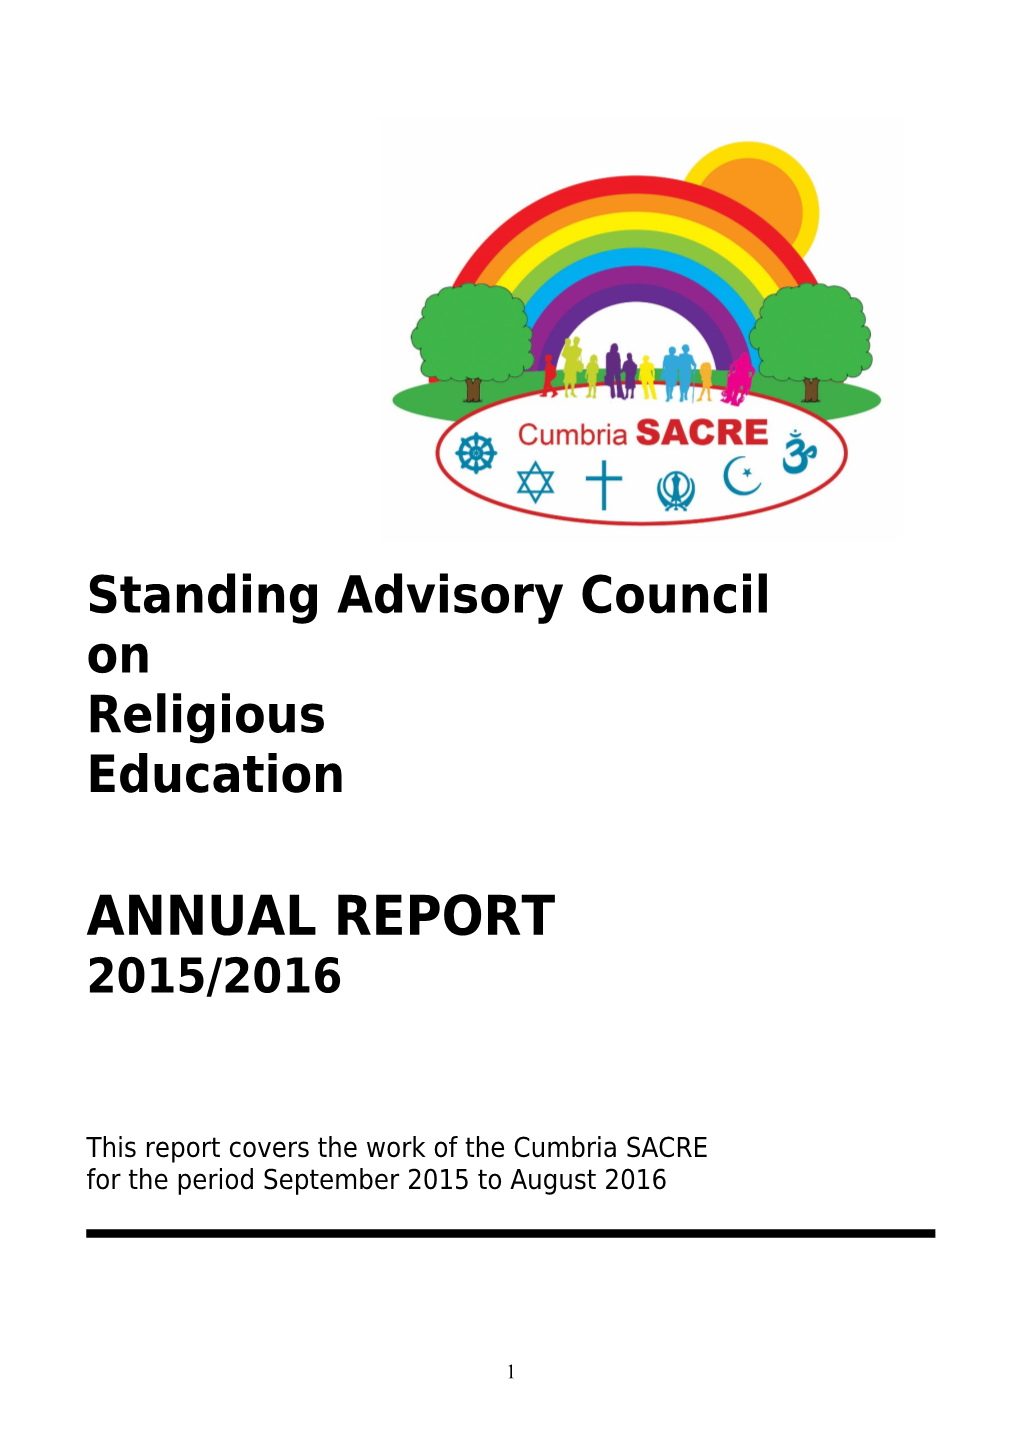 Standing Advisory Council on Religious Education - Annual Report